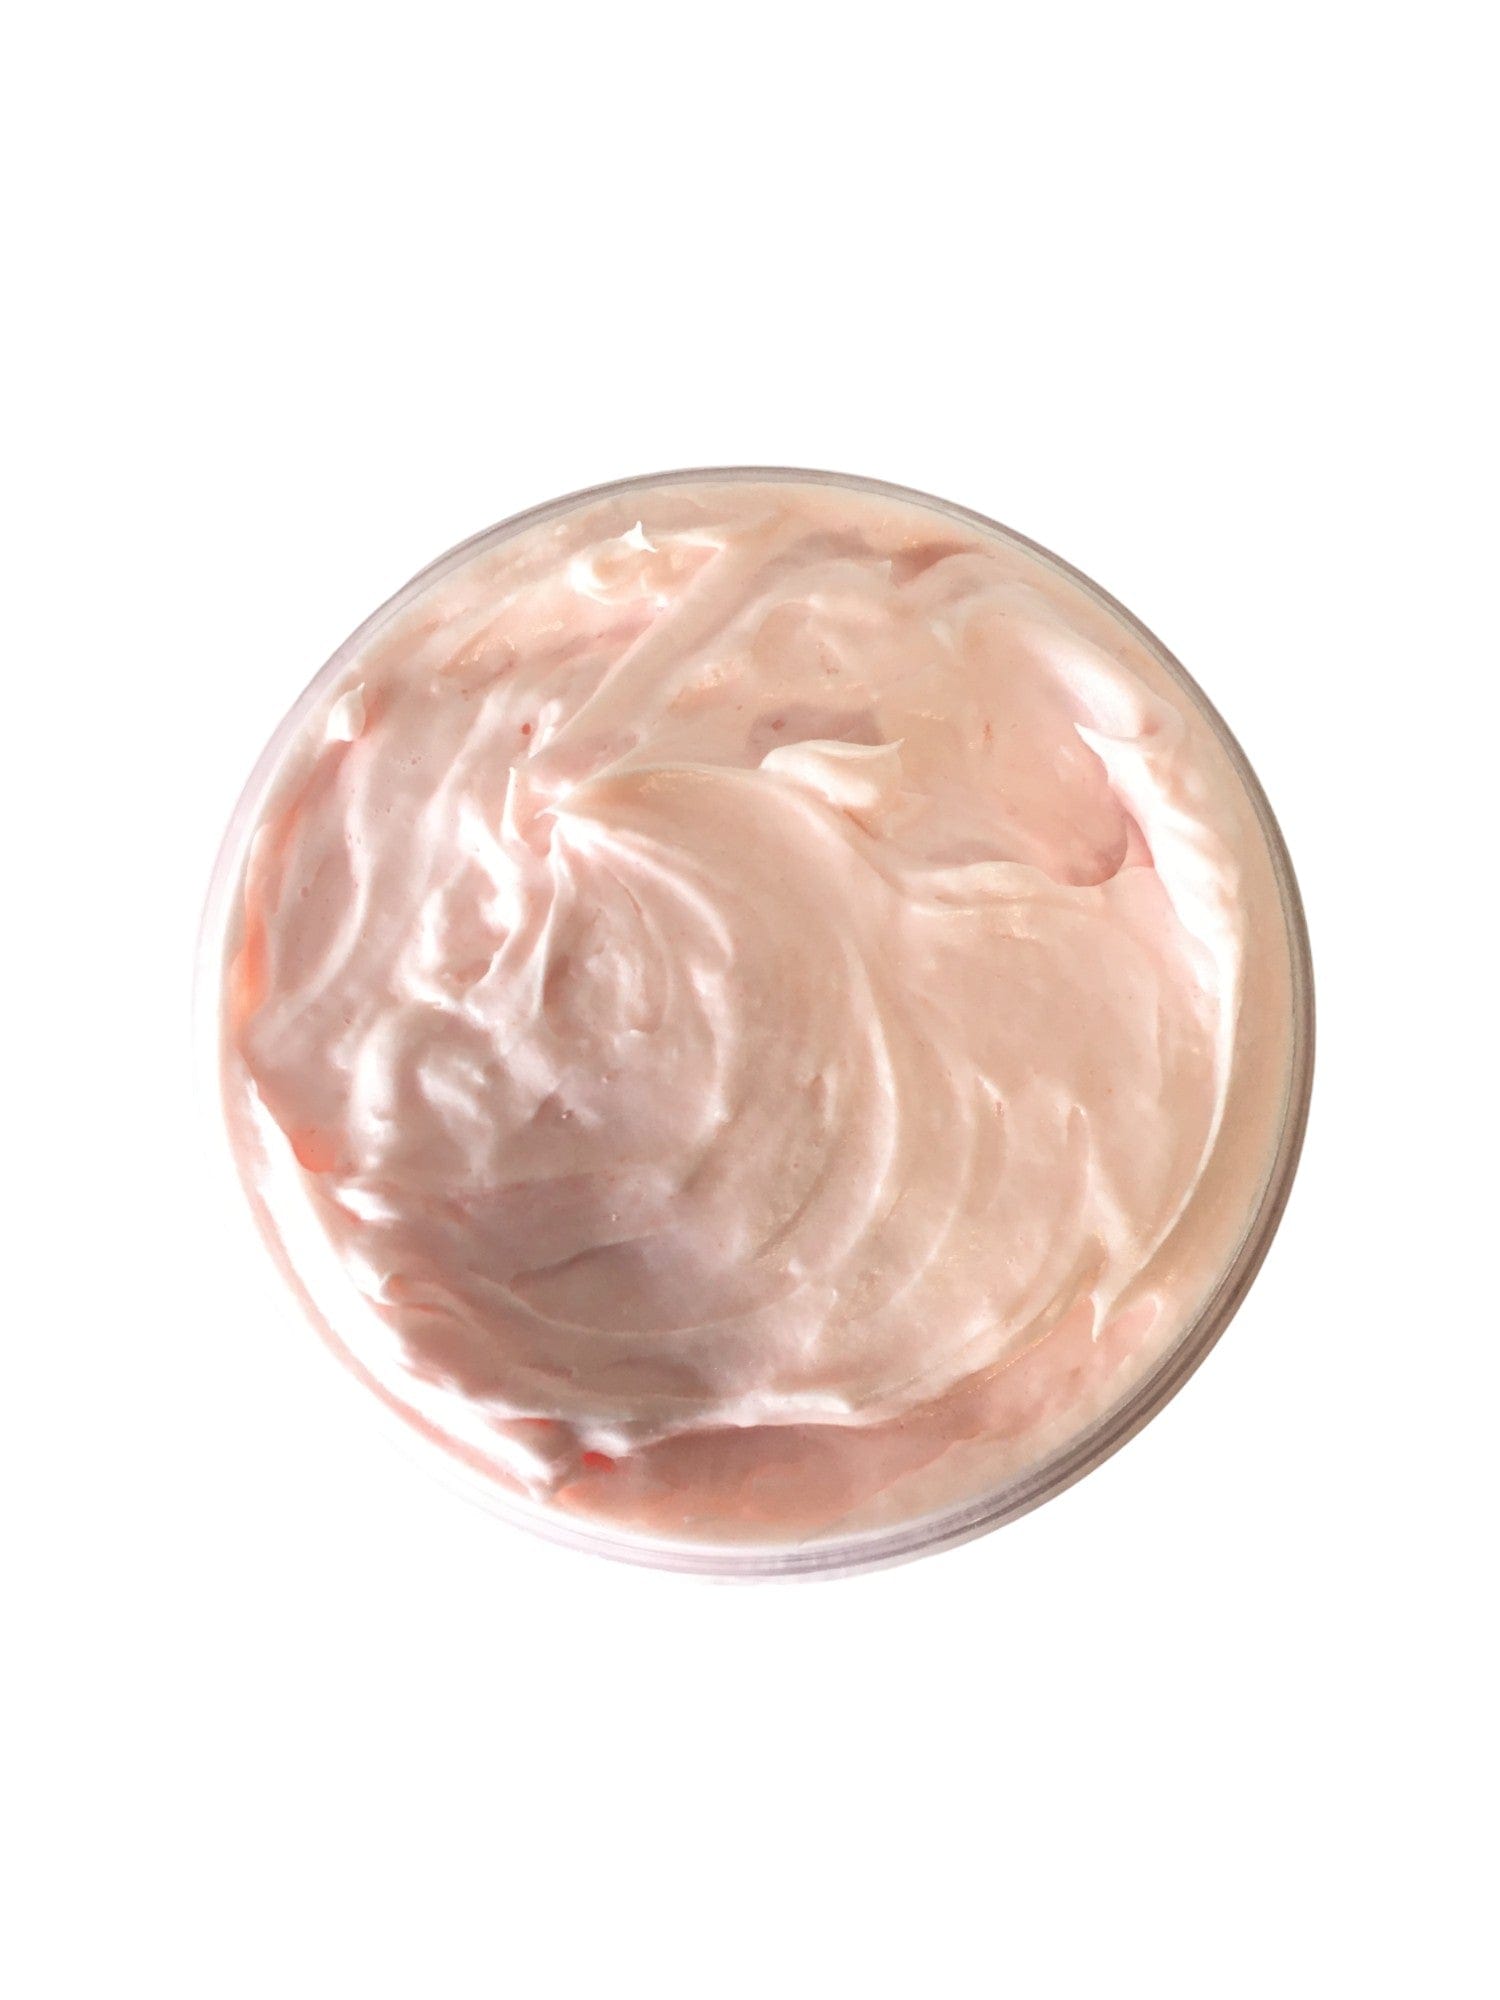 Citrus Coconut Whipped Soap